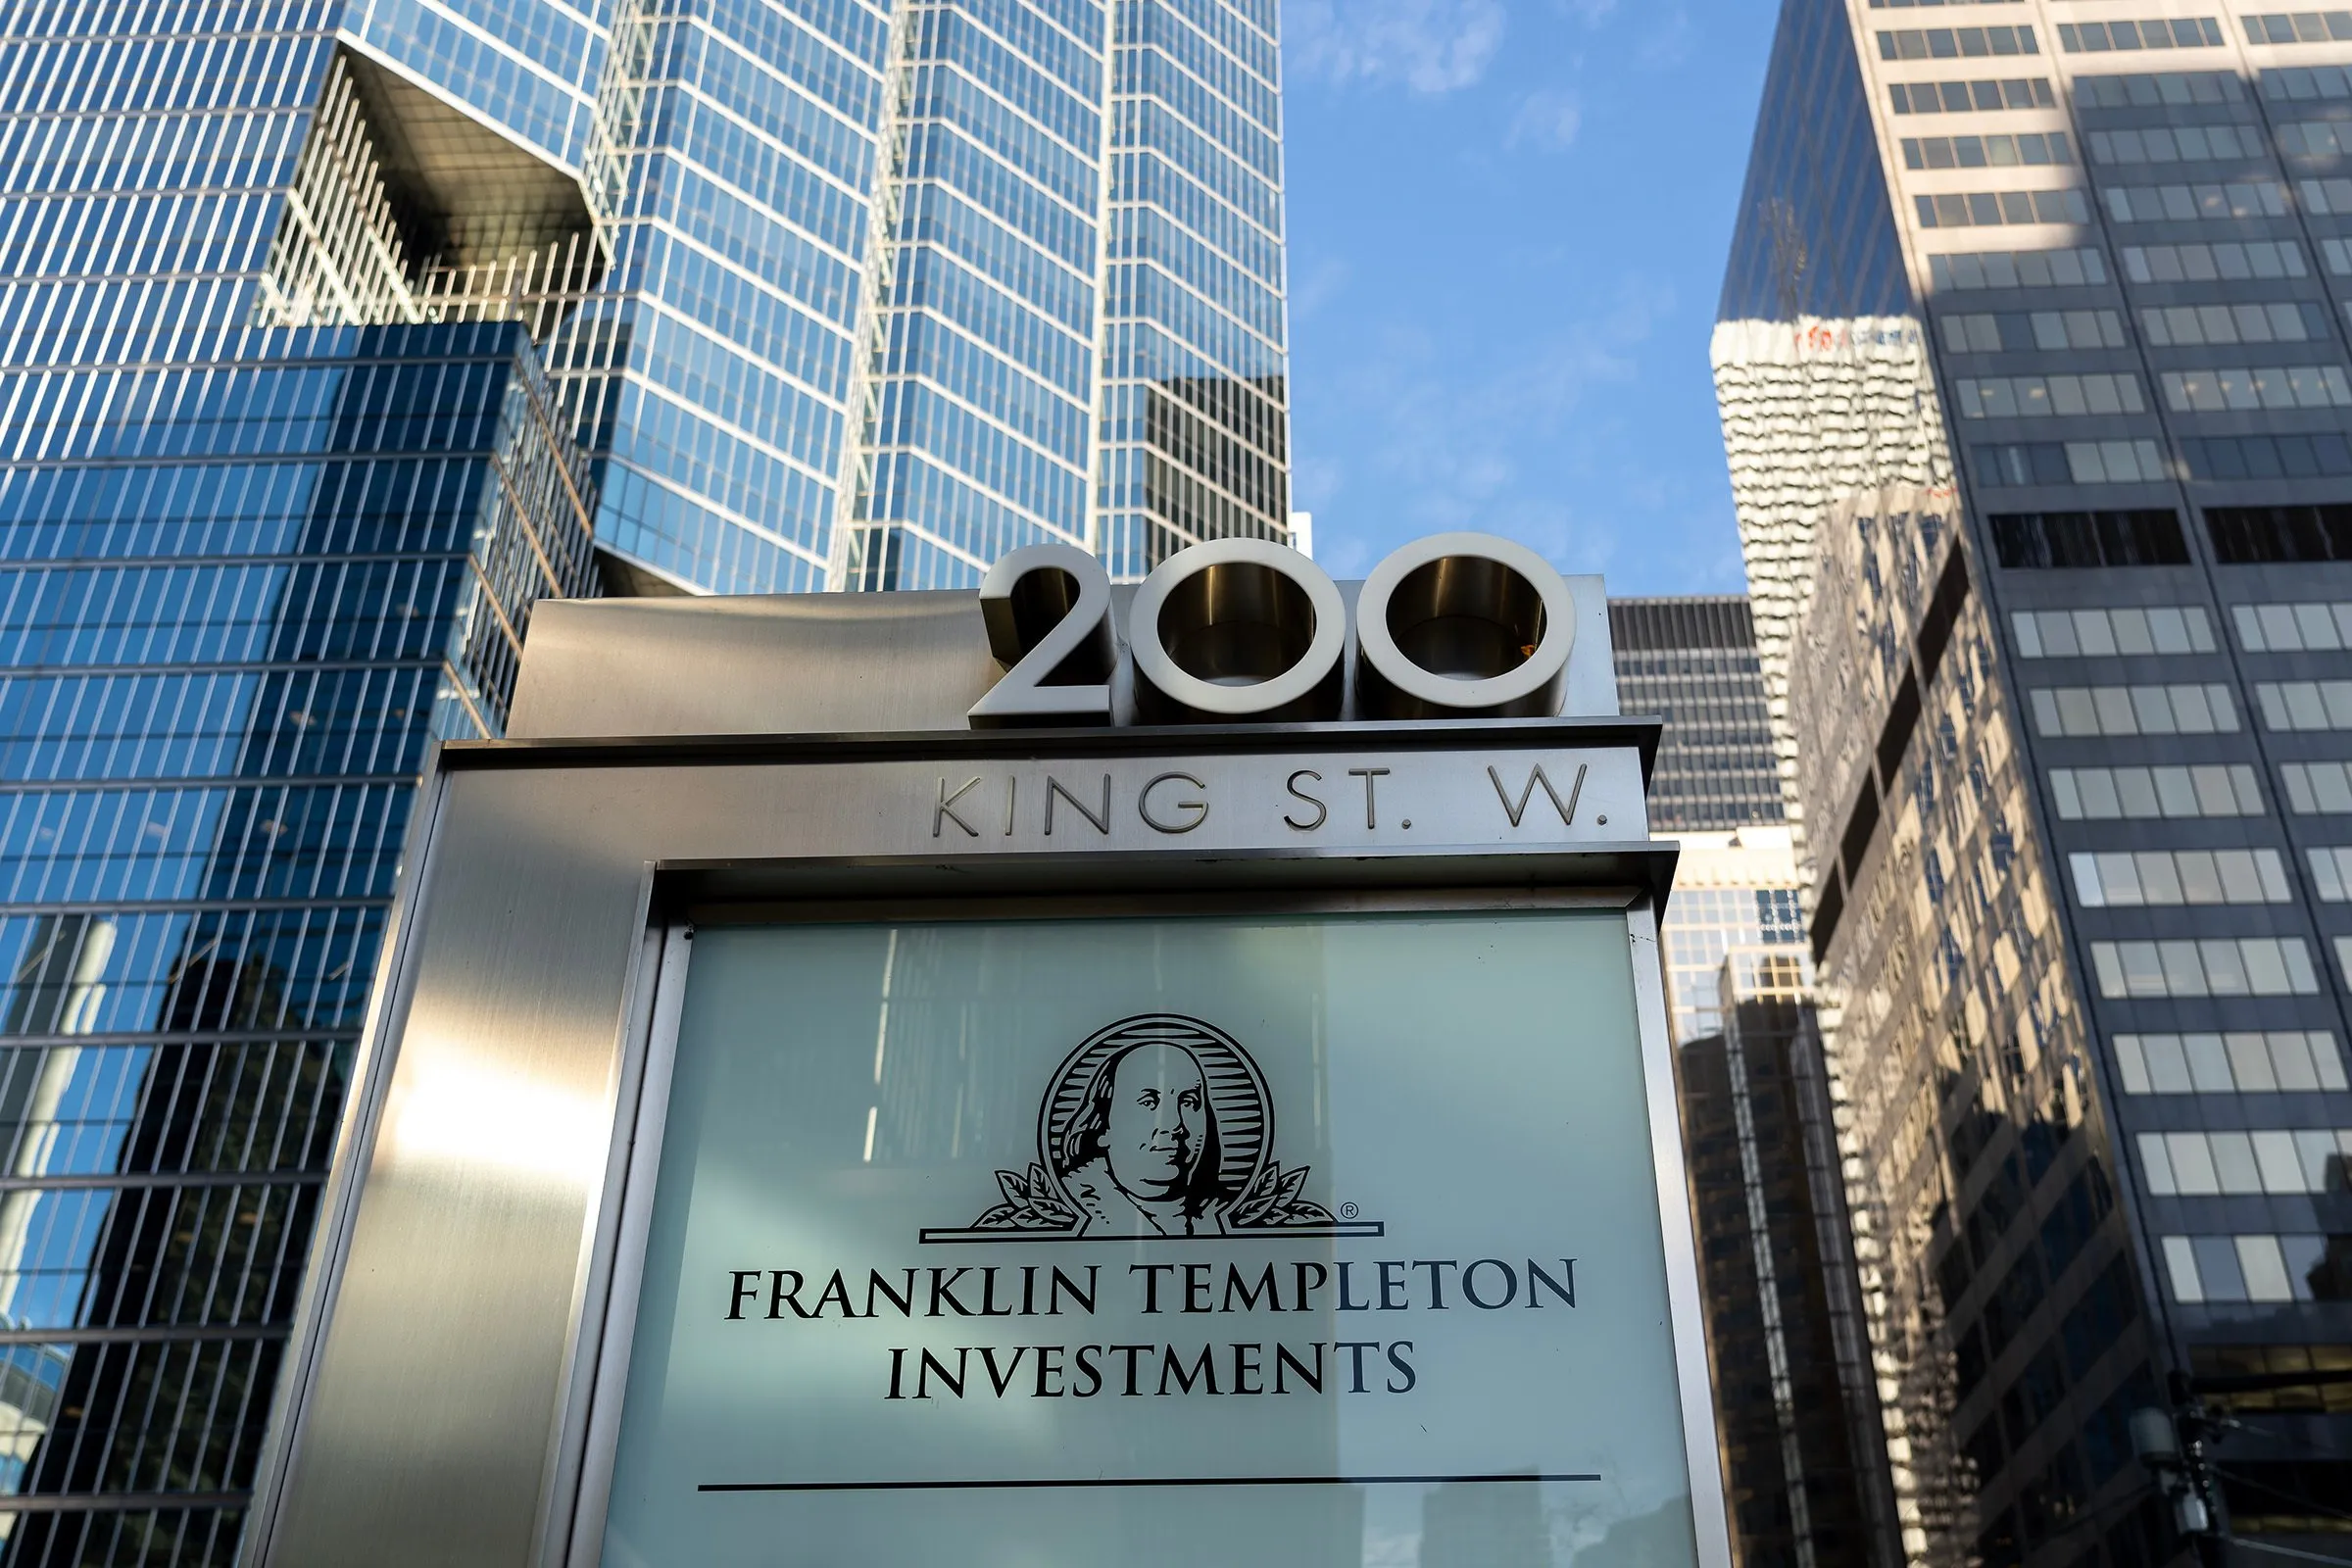 Sign for Franklin Templeton as seen in downtown Toronto, Canada. Franklin Templeton is a global investment firm headquartered in California.